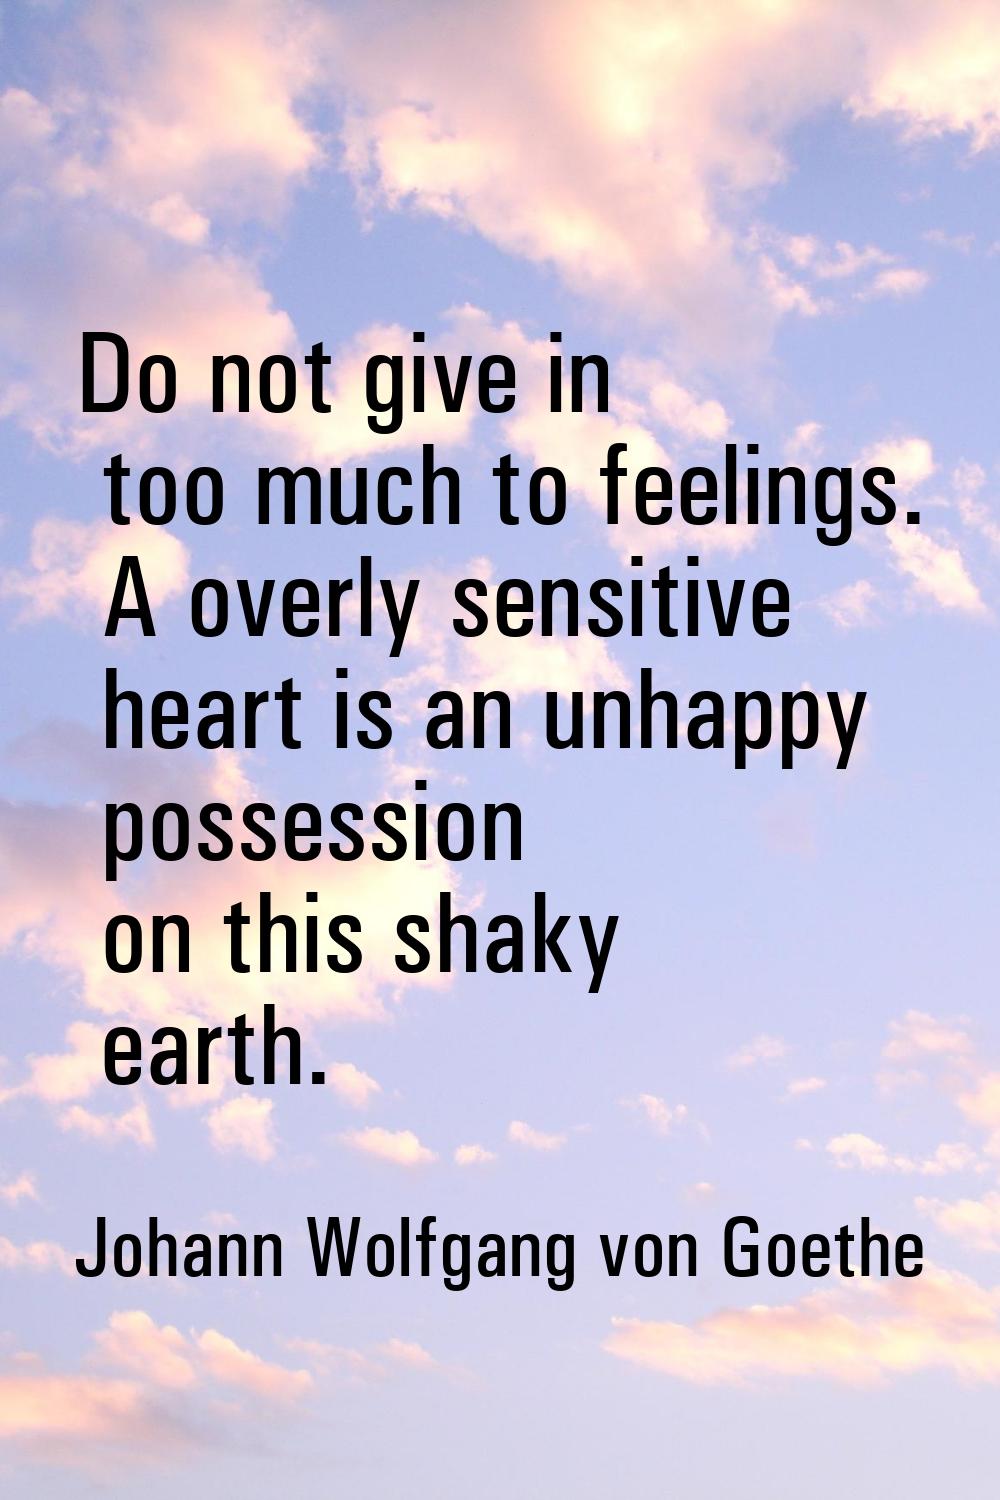 Do not give in too much to feelings. A overly sensitive heart is an unhappy possession on this shak